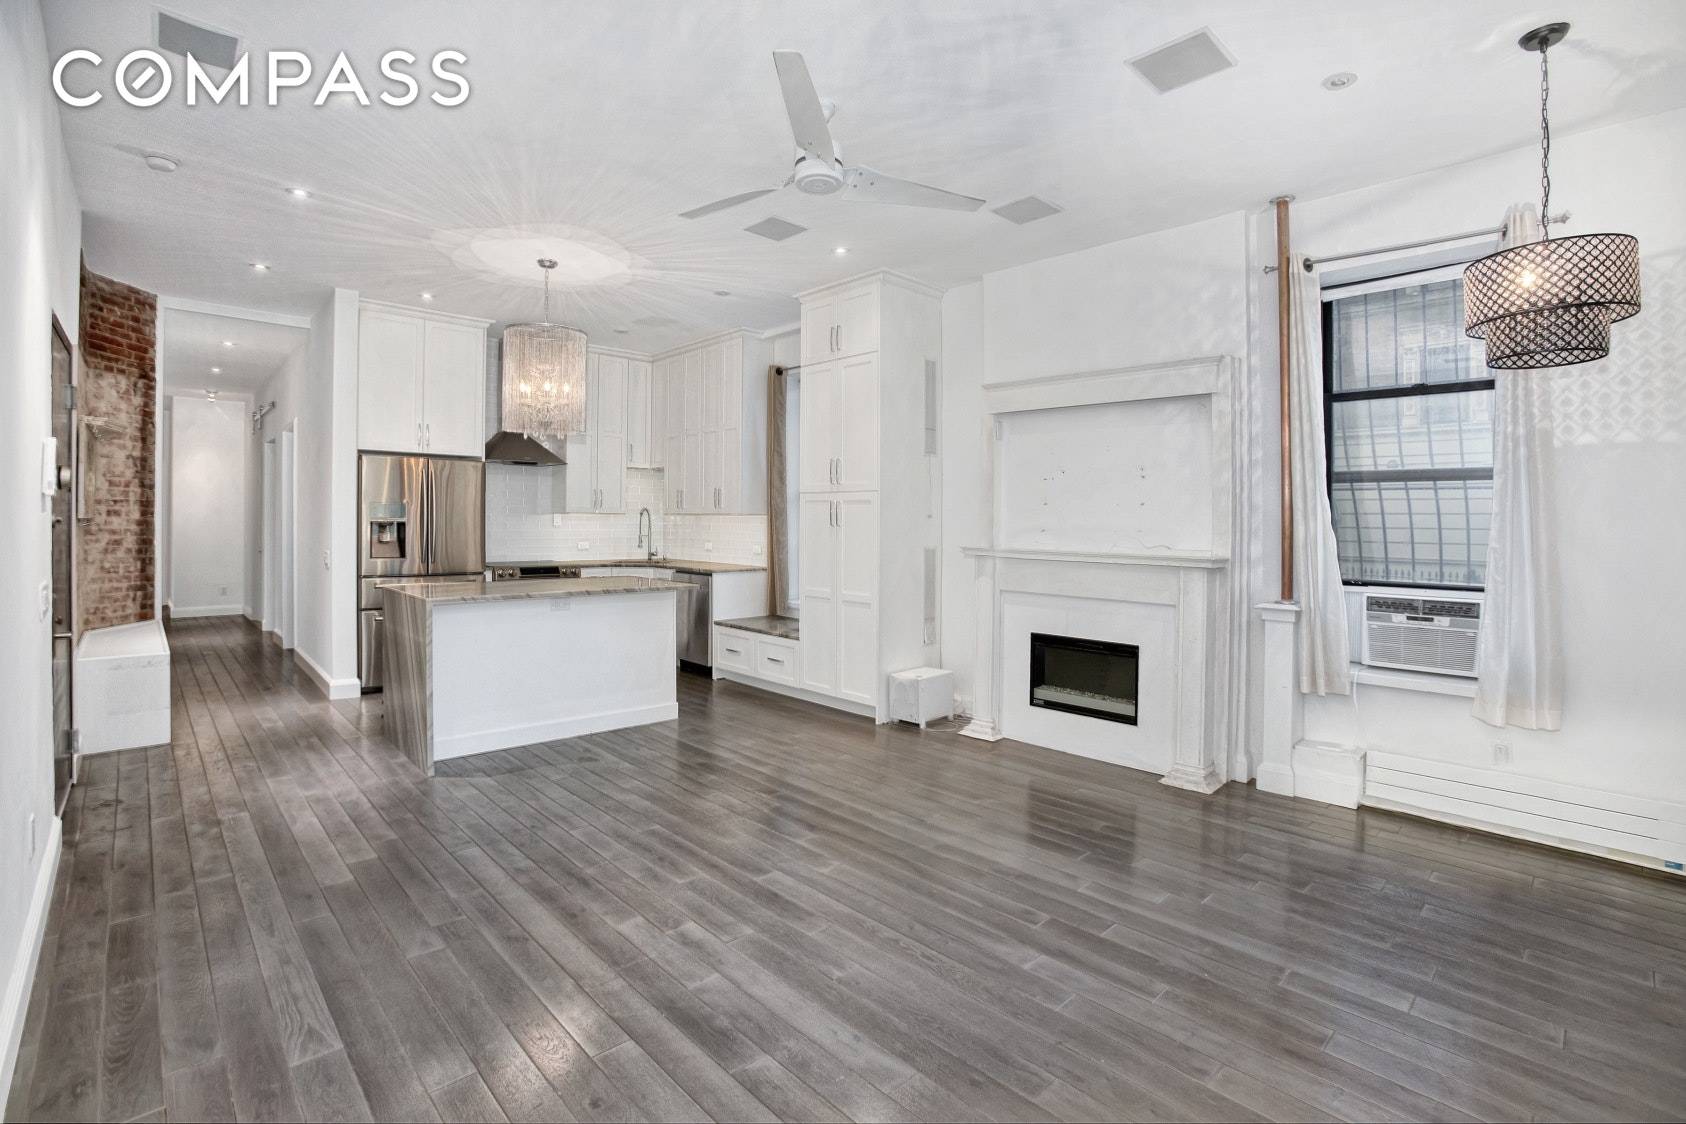 Enjoy pin drop quiet and direct access to Central Park in this masterfully remodeled two bedroom, two bathroom condominium in the heart of historic Harlem.